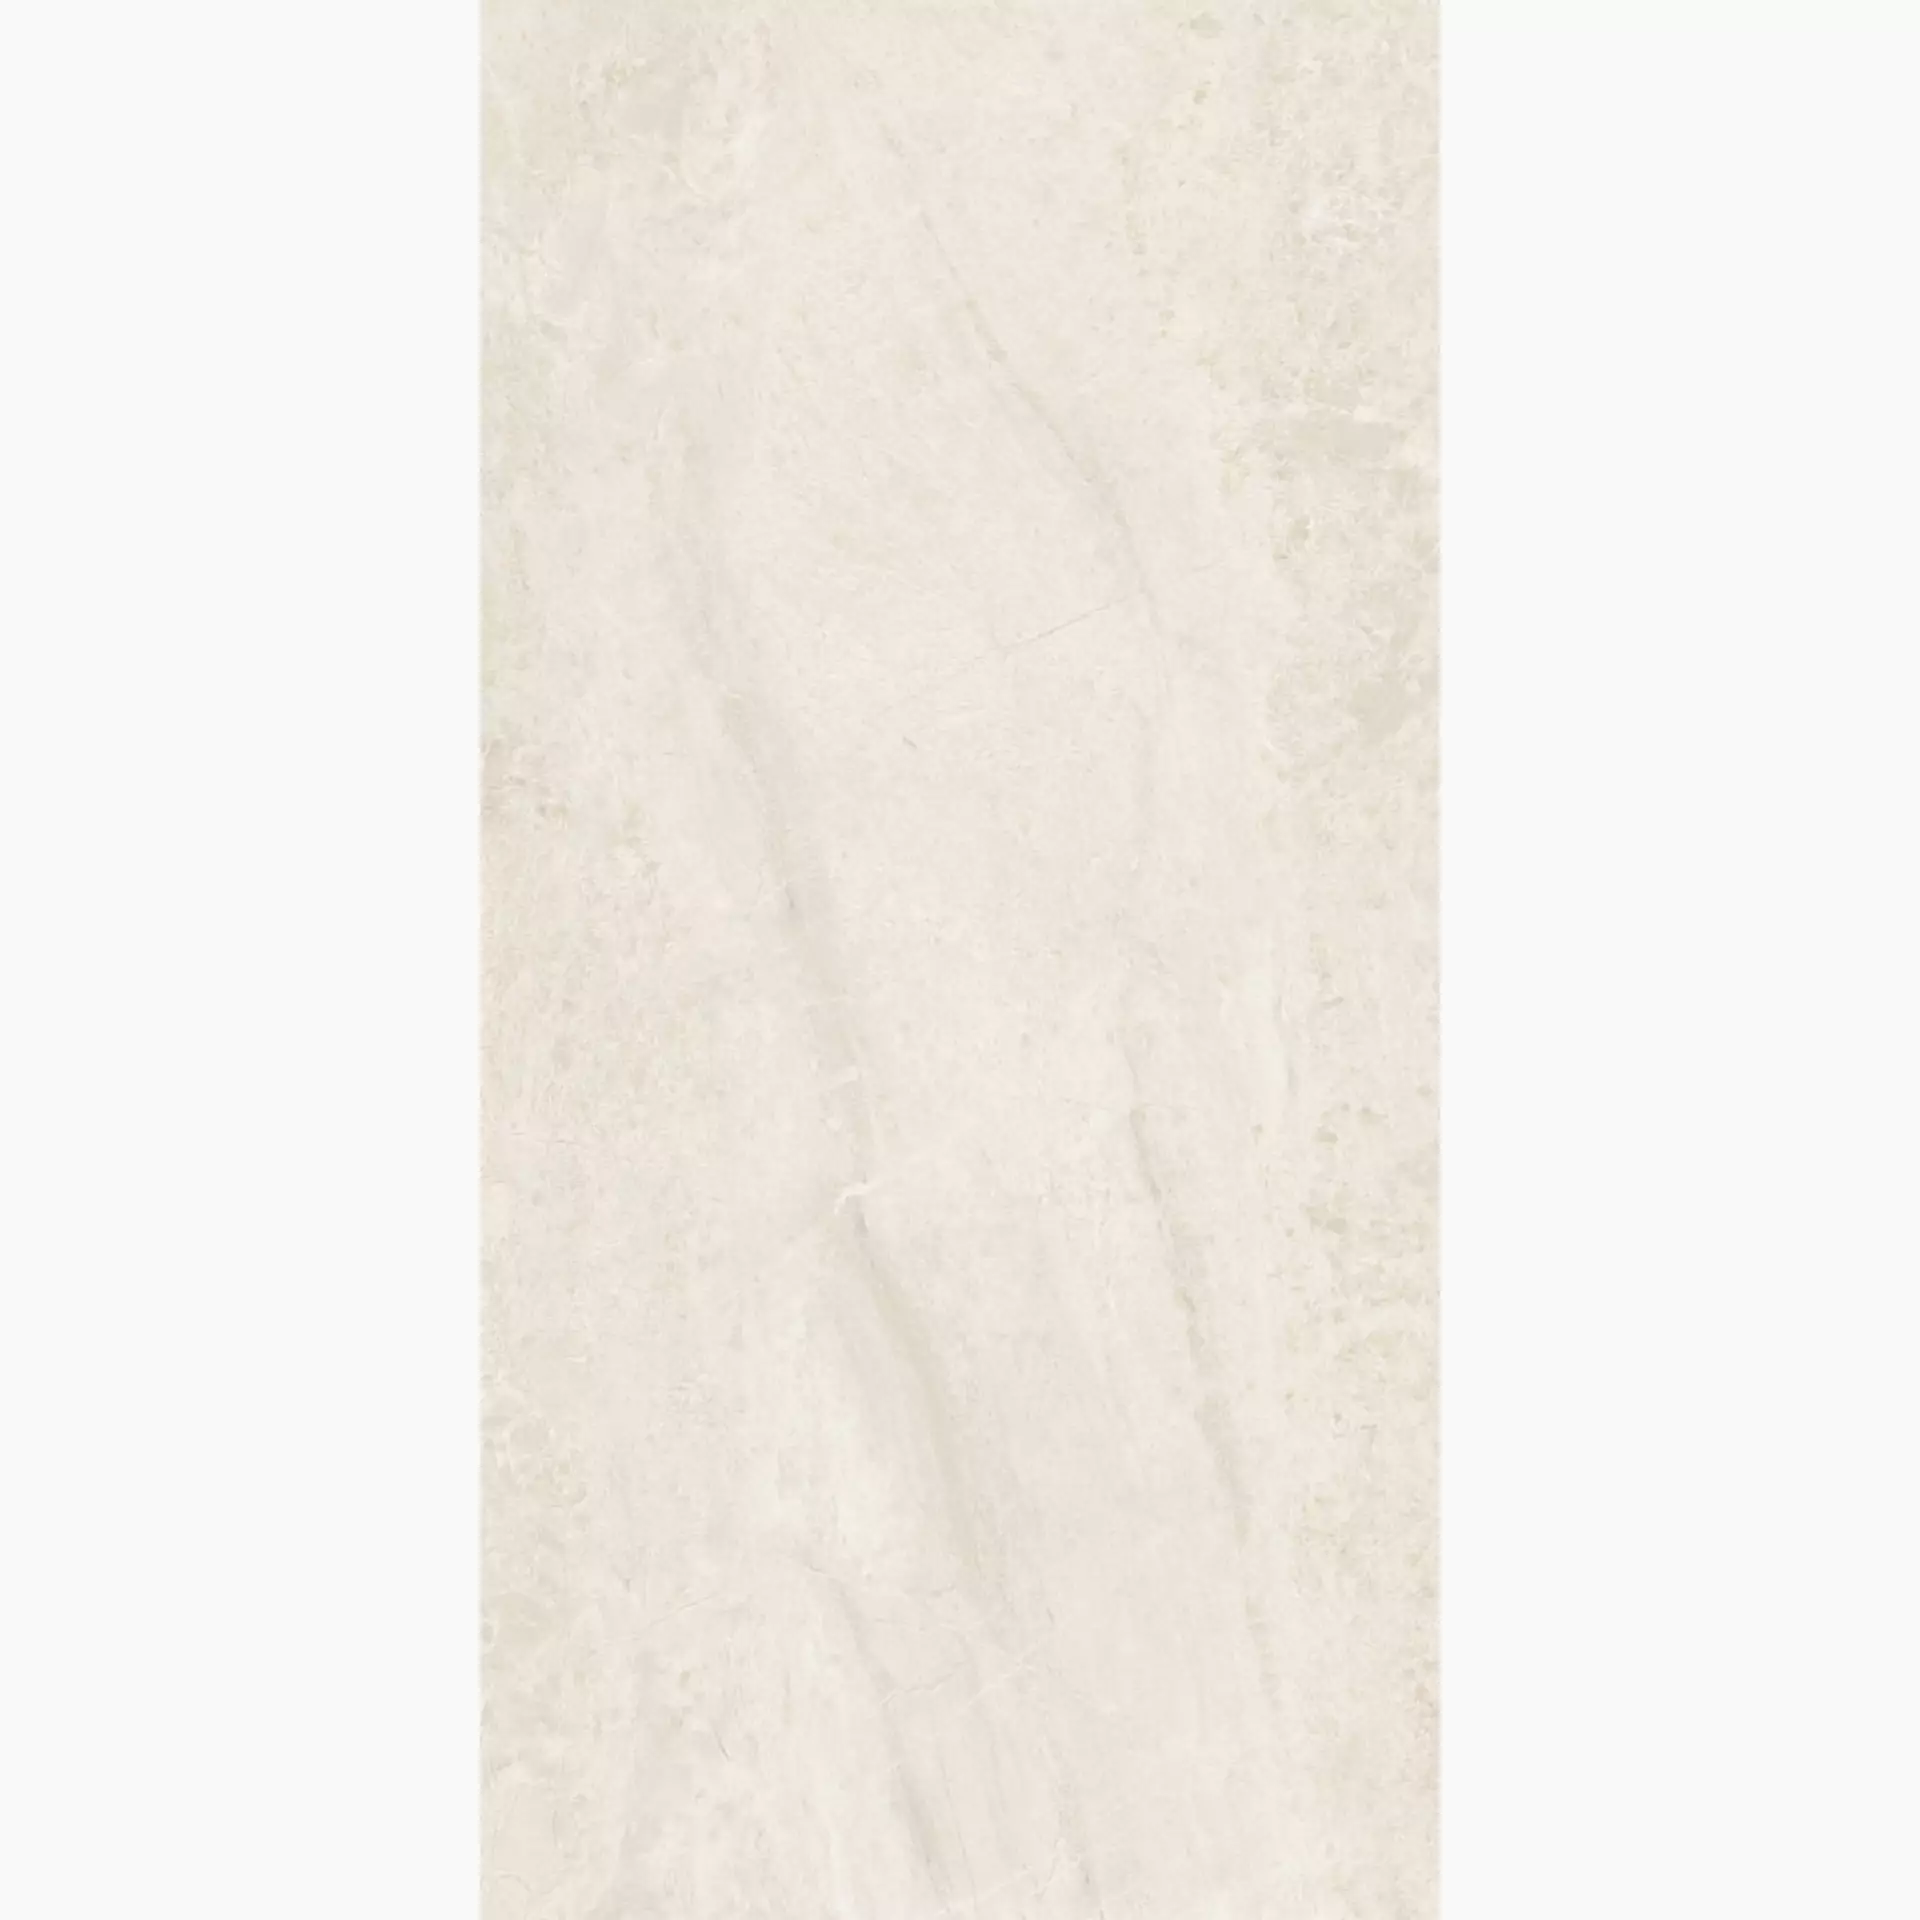 Sant Agostino Paradiso Beige Natural CSAPBEI612 60x120cm rectified 9mm